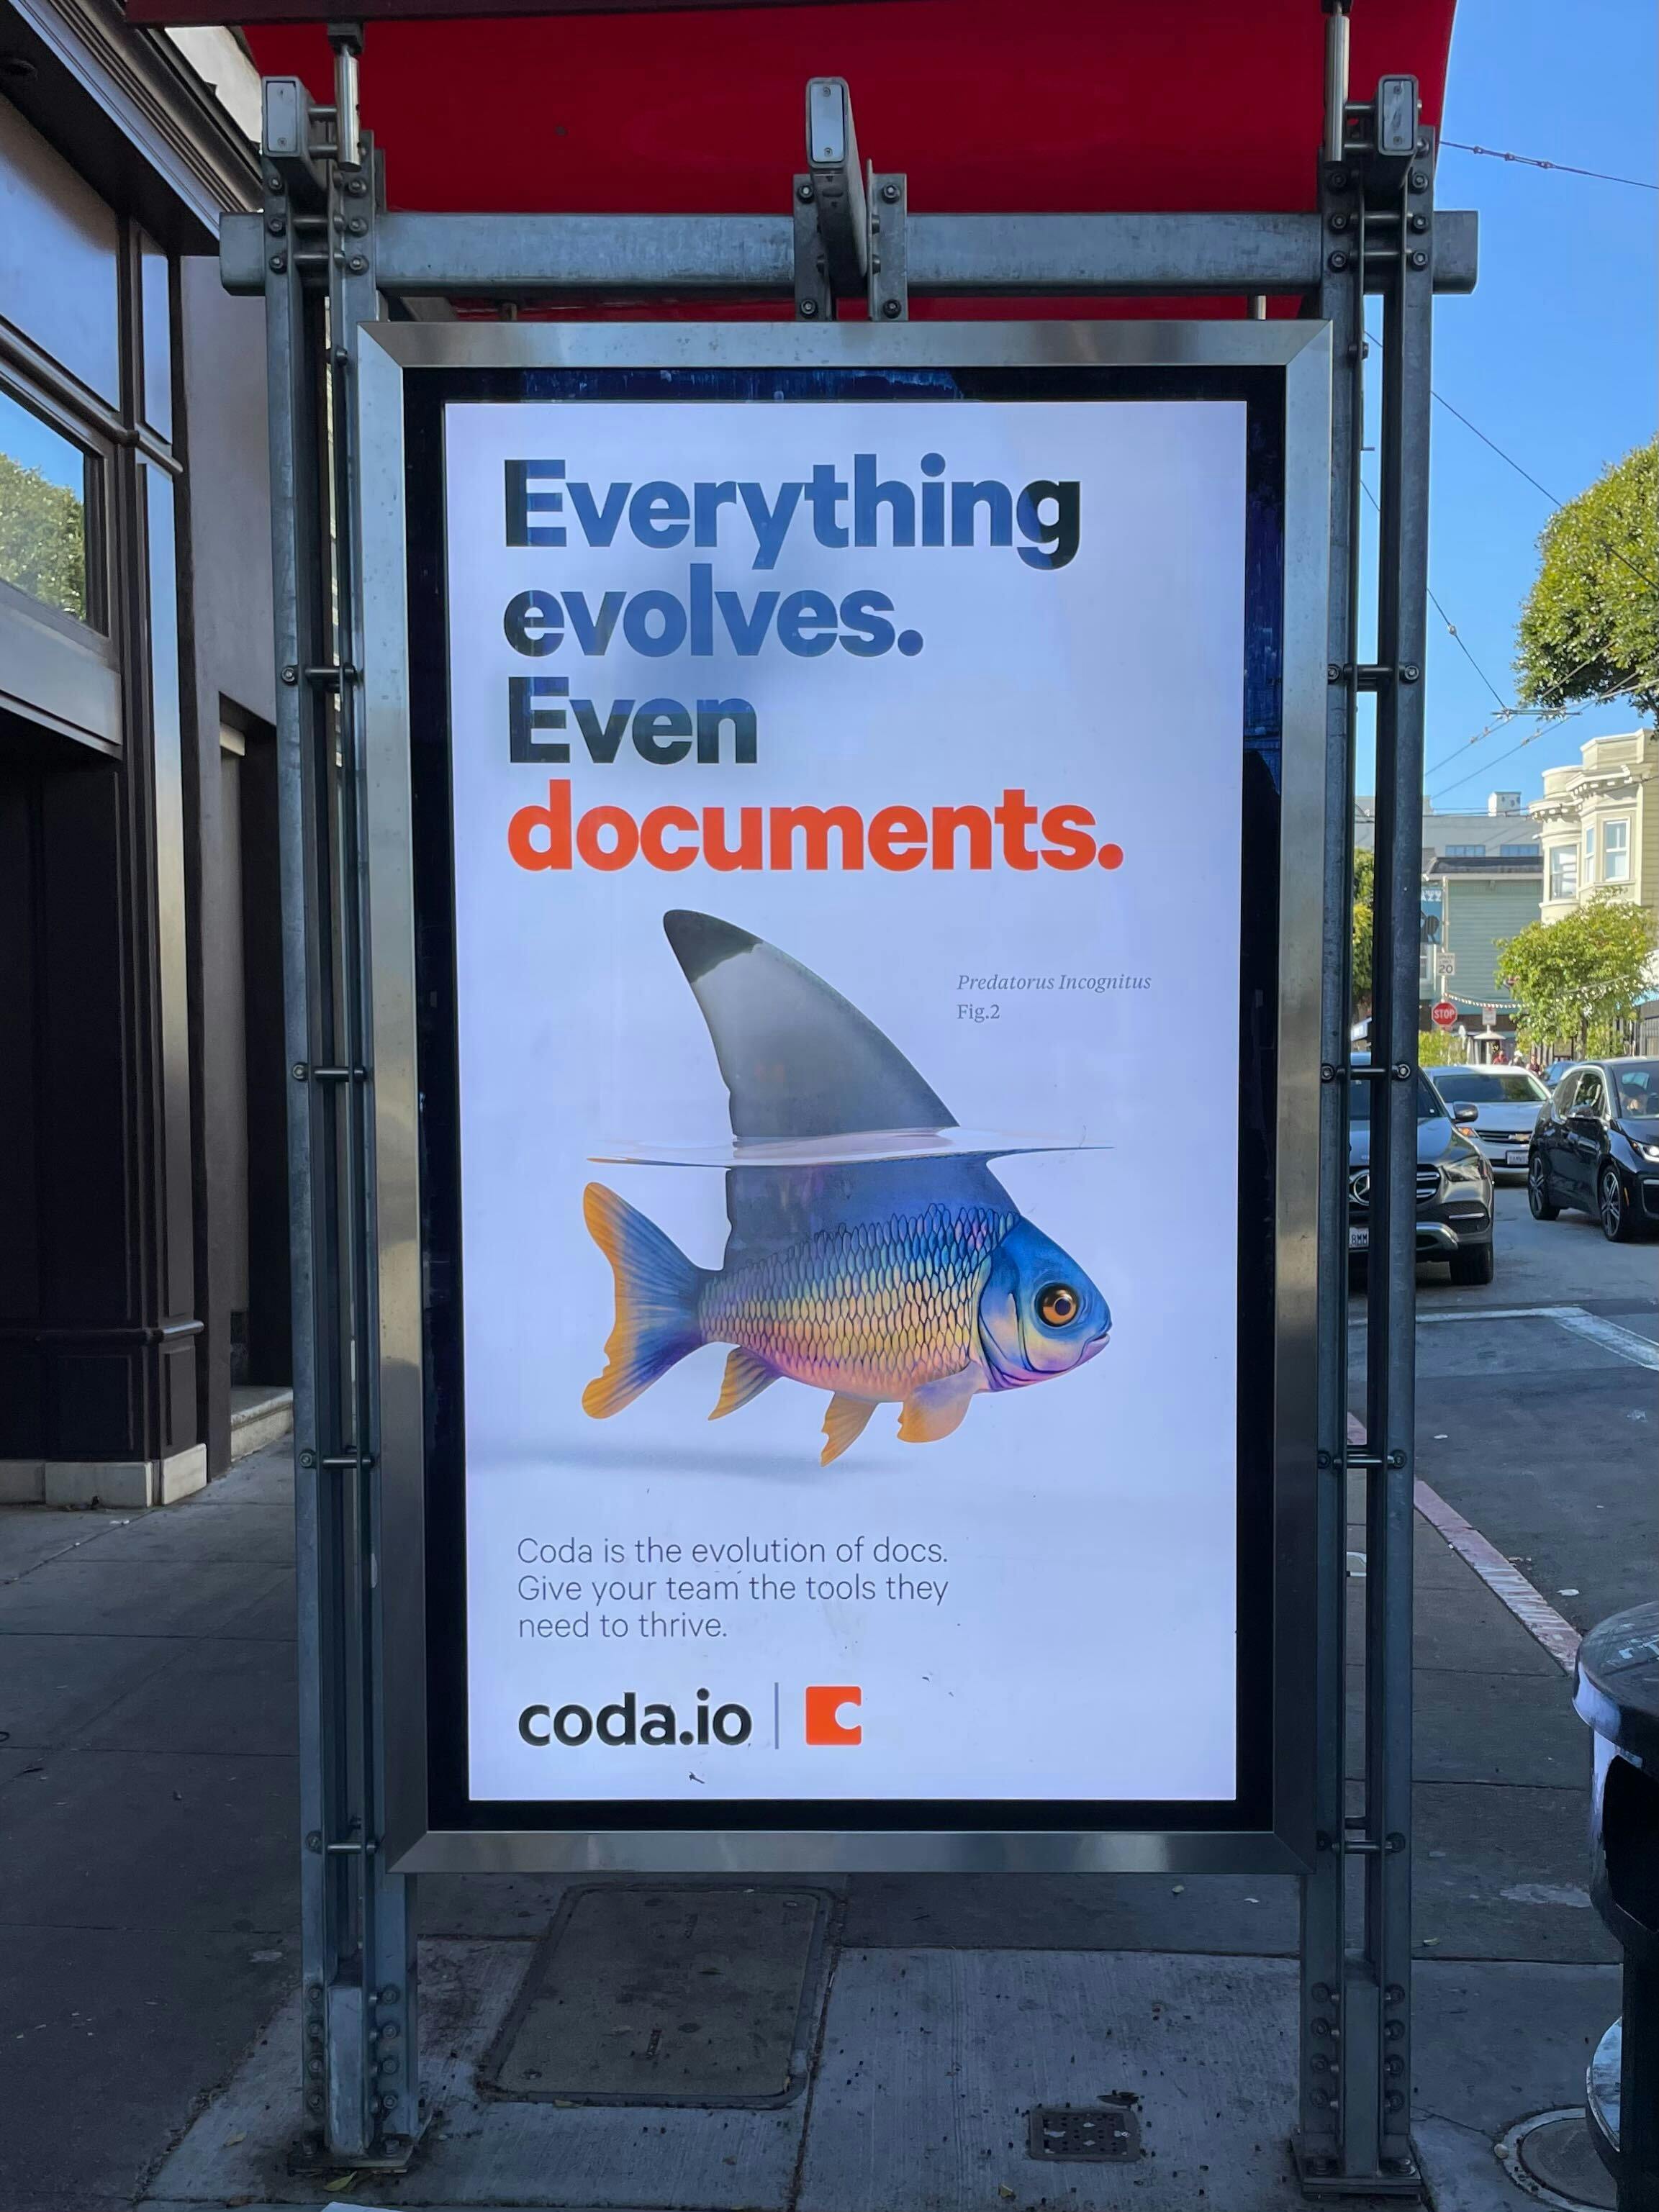 A billboard on a bus stop in San Francisco - Predatorus Incognitus, a friendly fish with a sharkfin